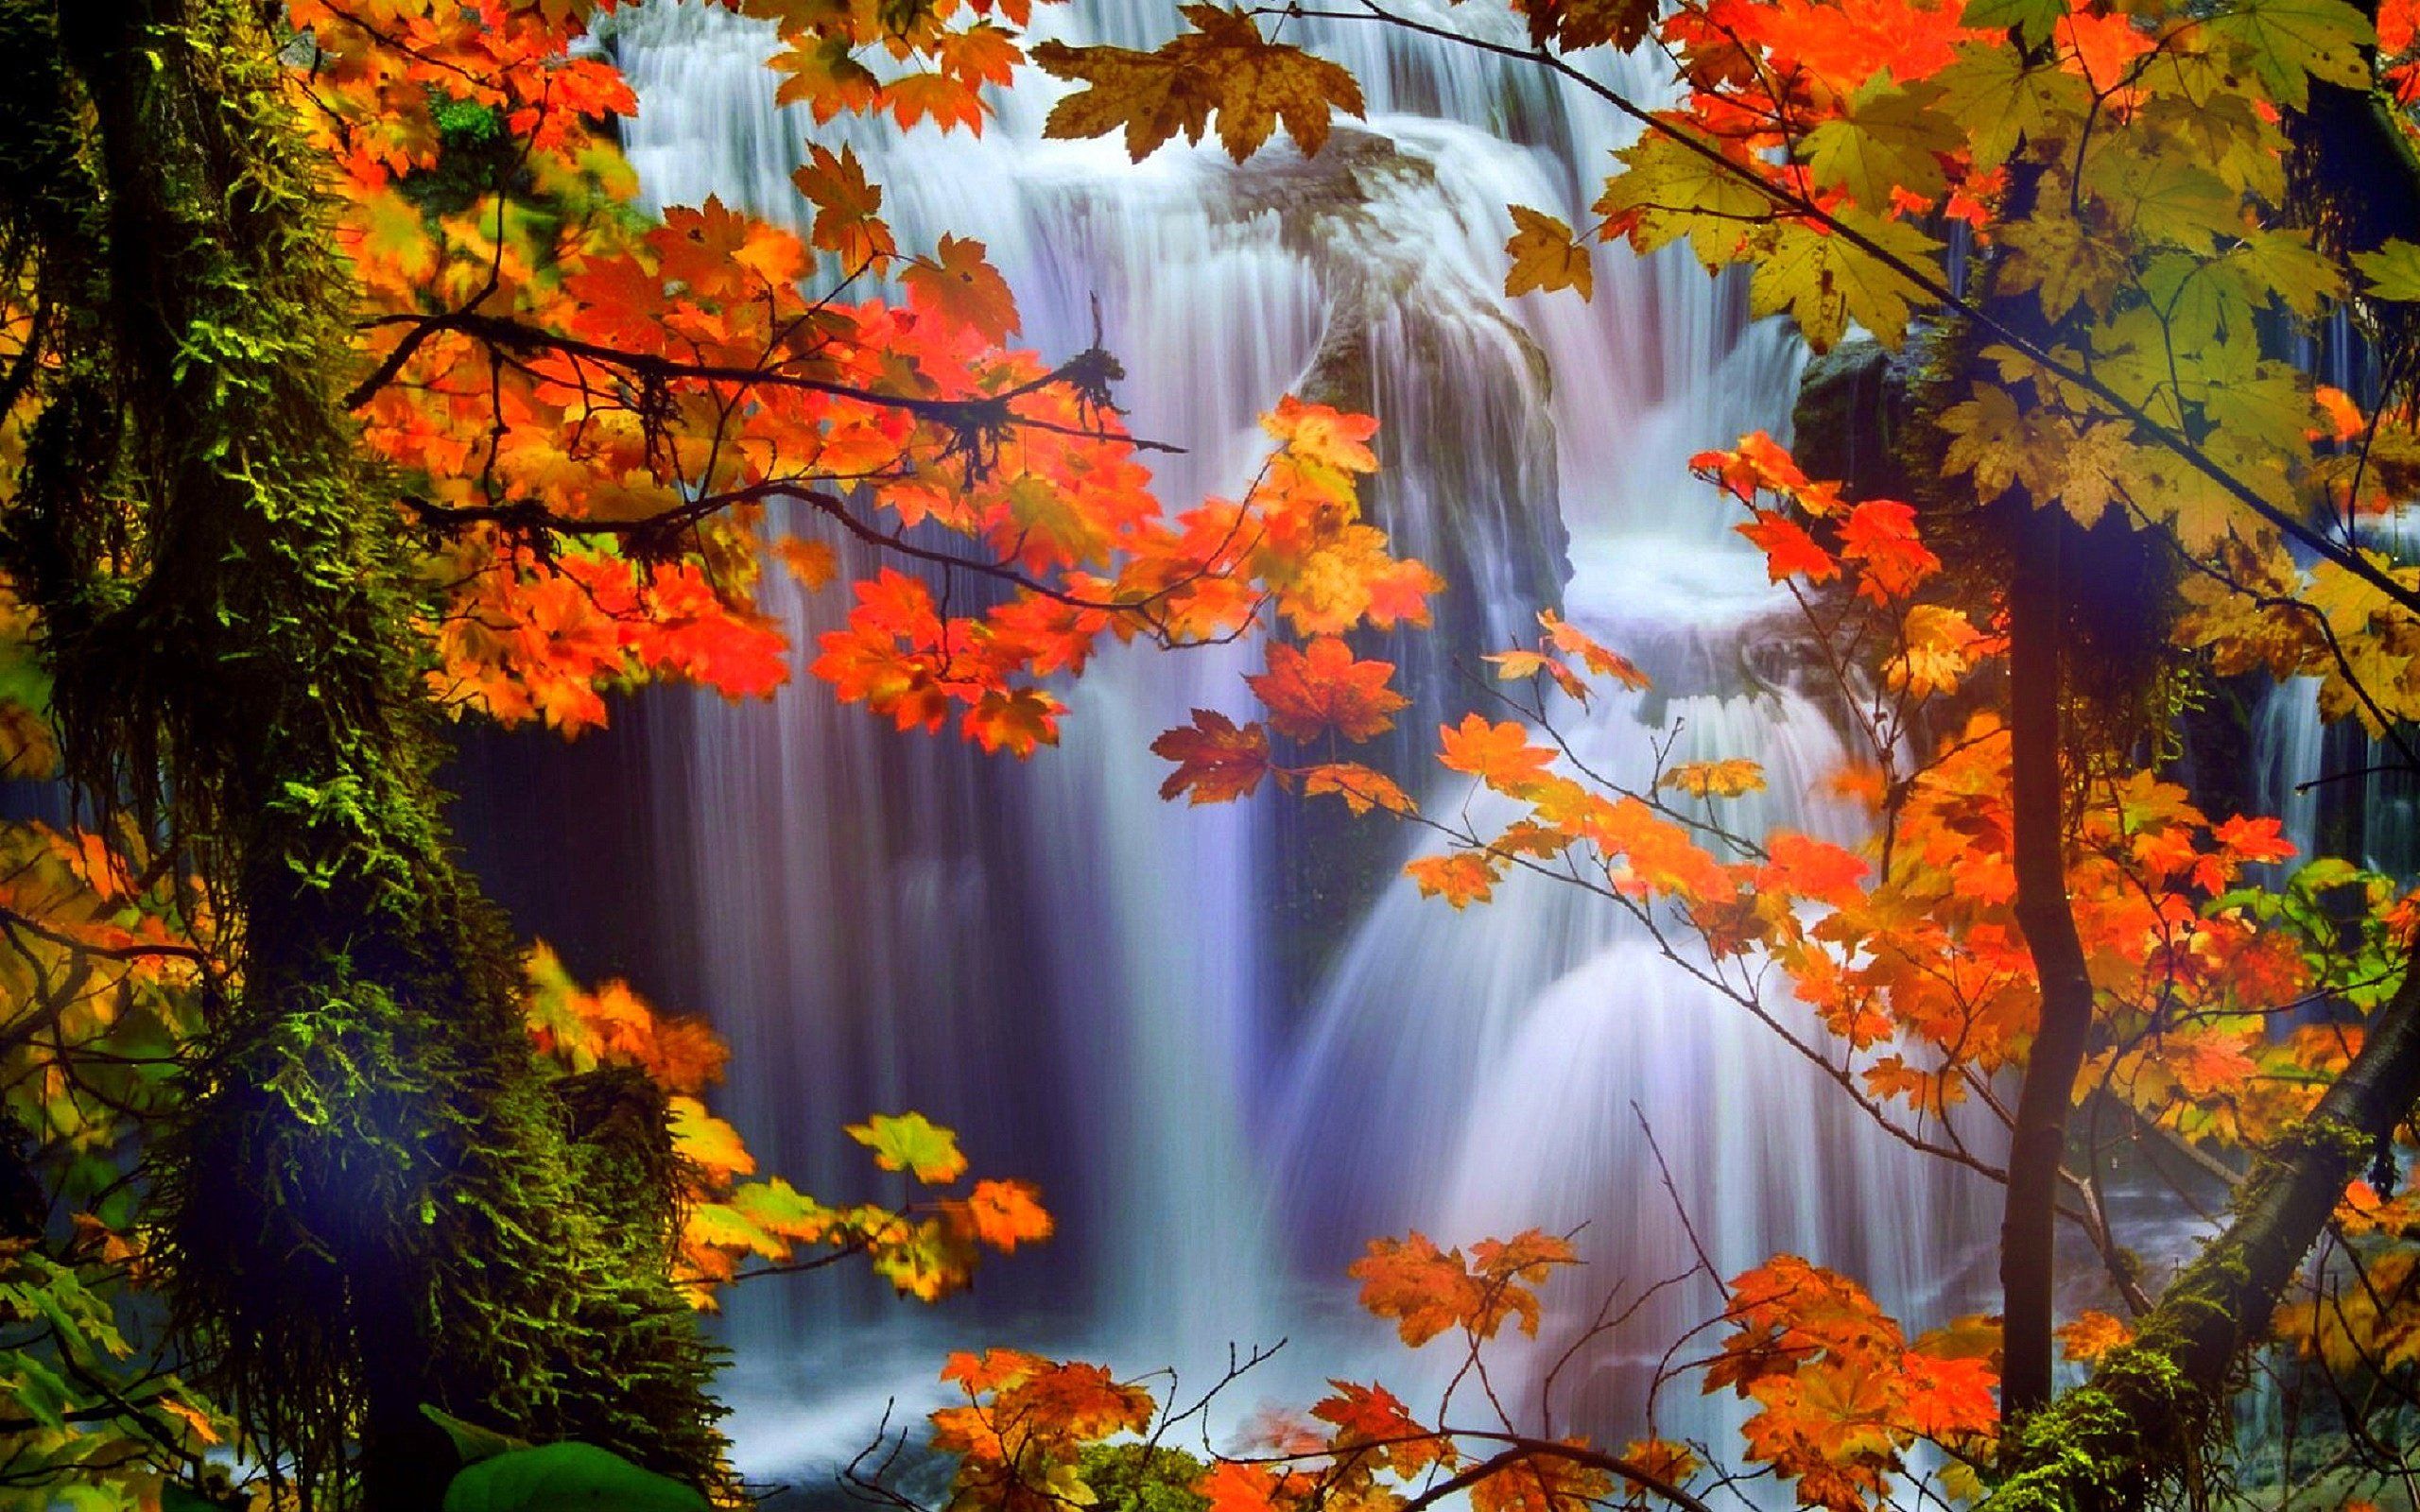 Attractions In Dreams Trees Nature Fall Leaves Beautiful Waterfalls Scenery Love Four Seasons Creative Pre Made Colors Stunning Falls Landscapes Autumn Wallpaperx1600